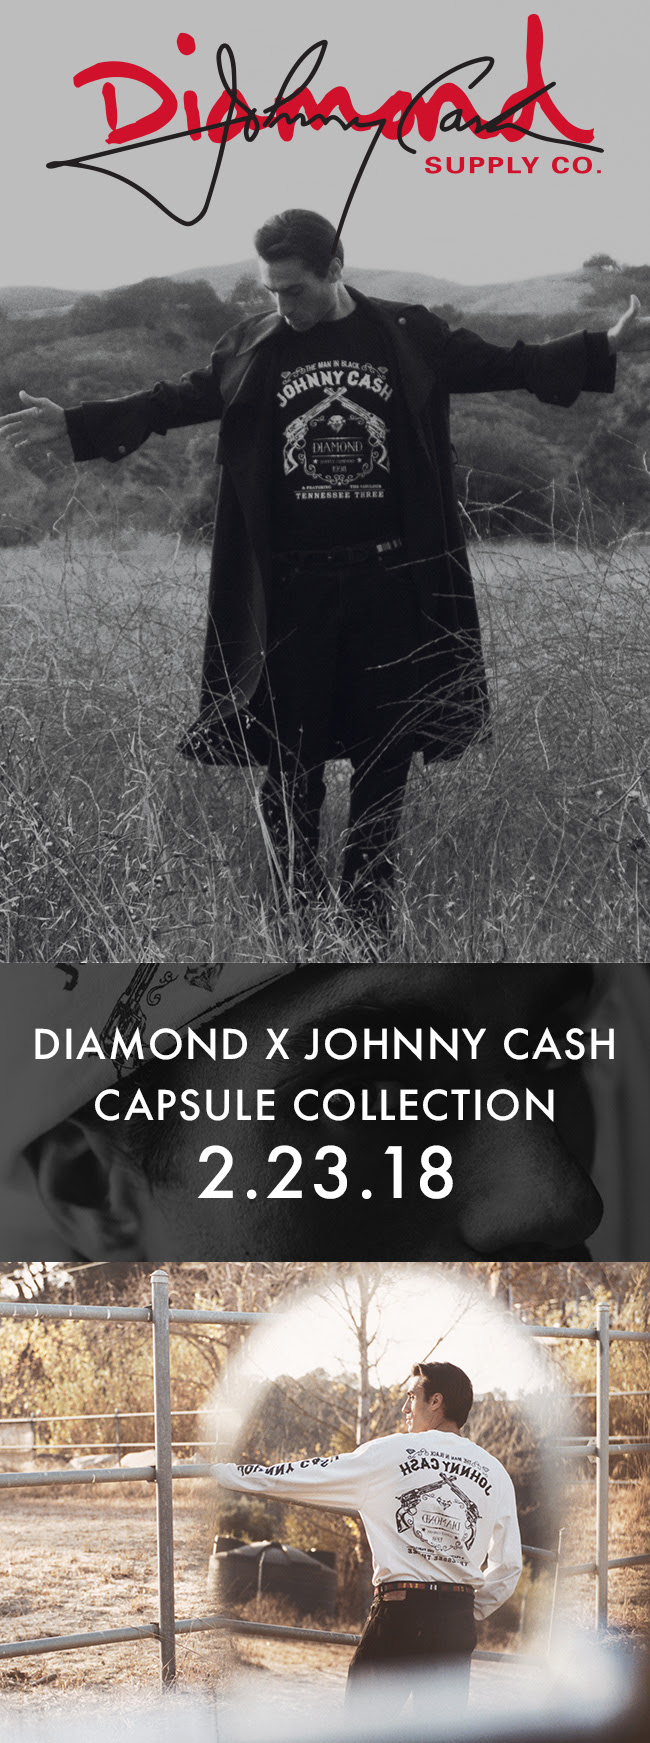 This Friday: Diamond x Johnny Cash Capsule Collection